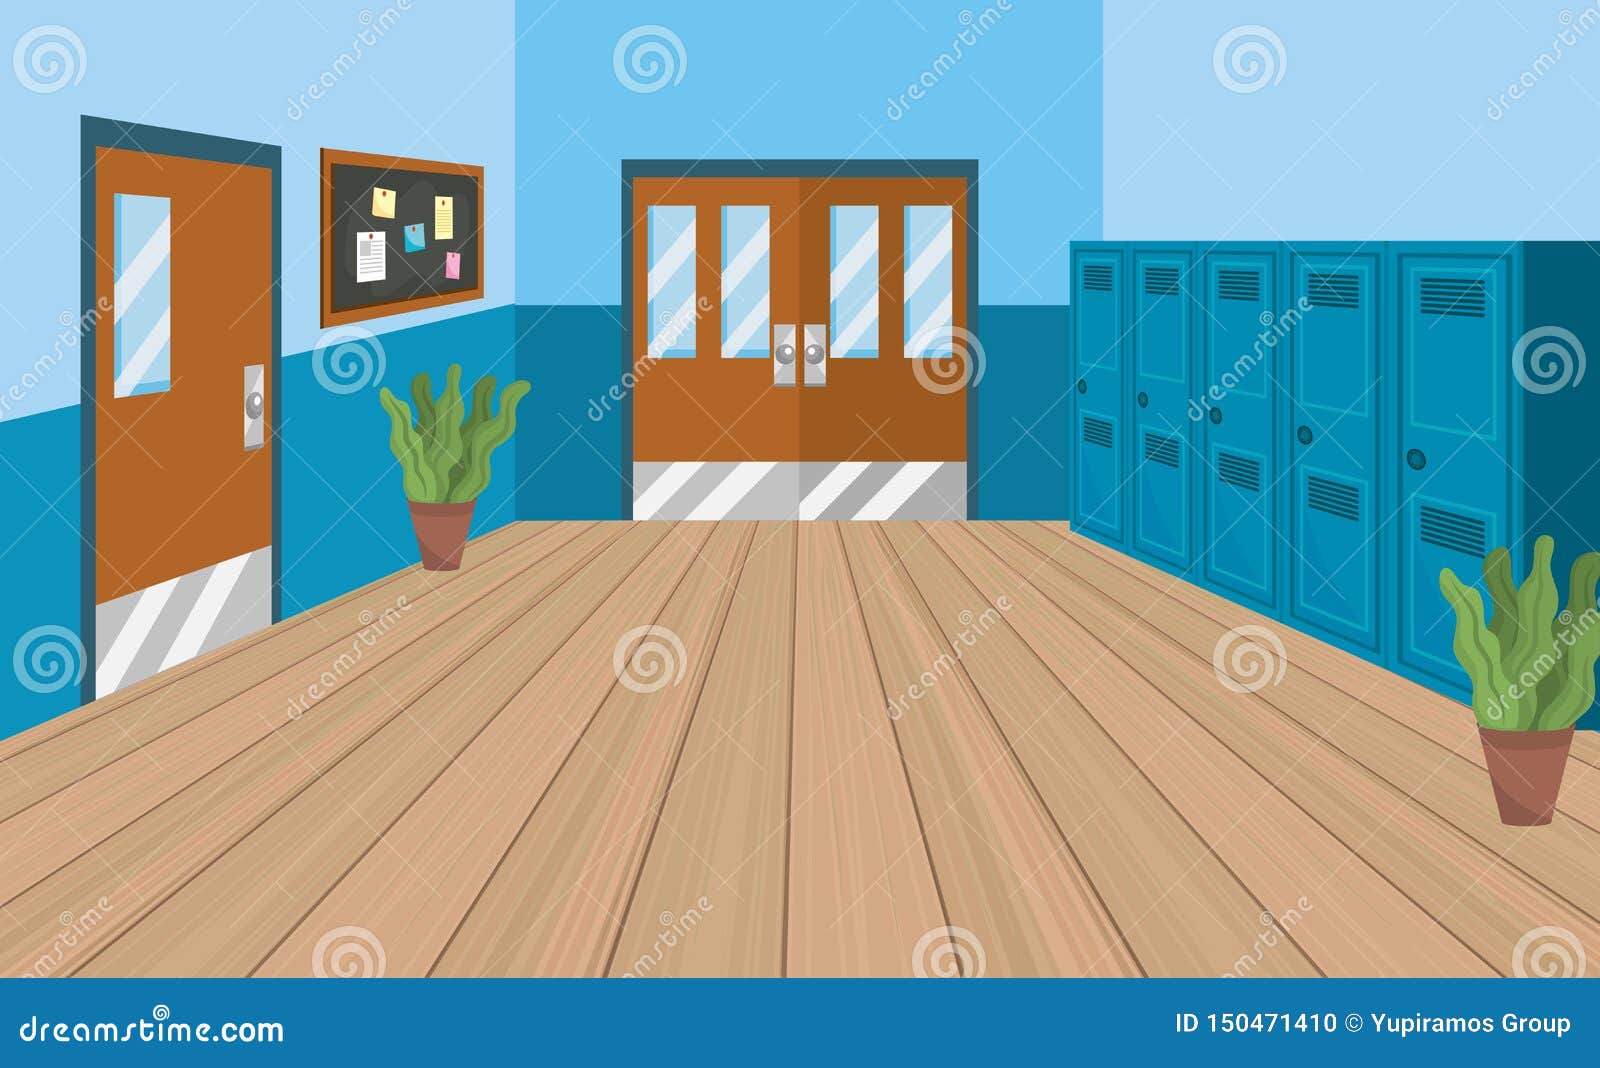 school education with lockers and classrooms with noteboard